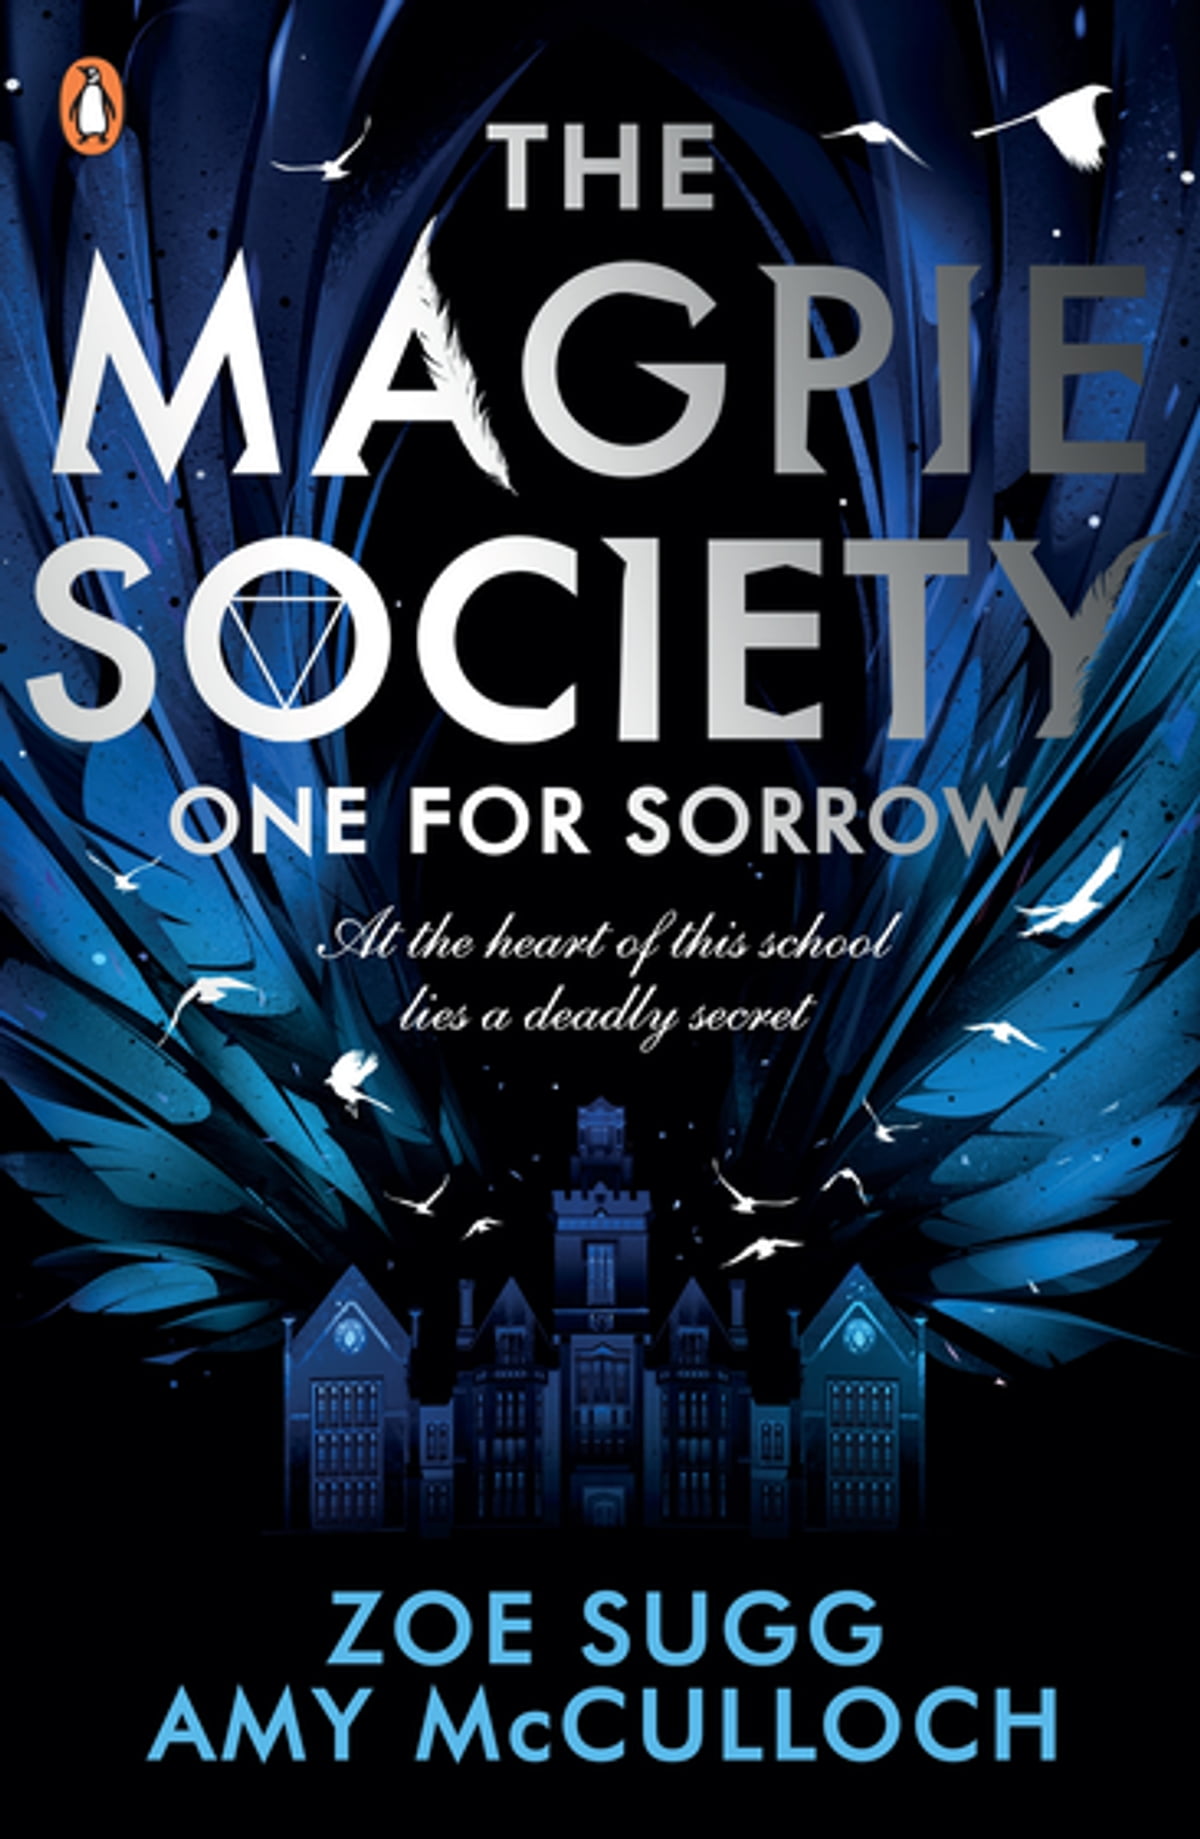 Zoe Sugg, Amy McCulloch: The Magpie Society: One For Sorrow